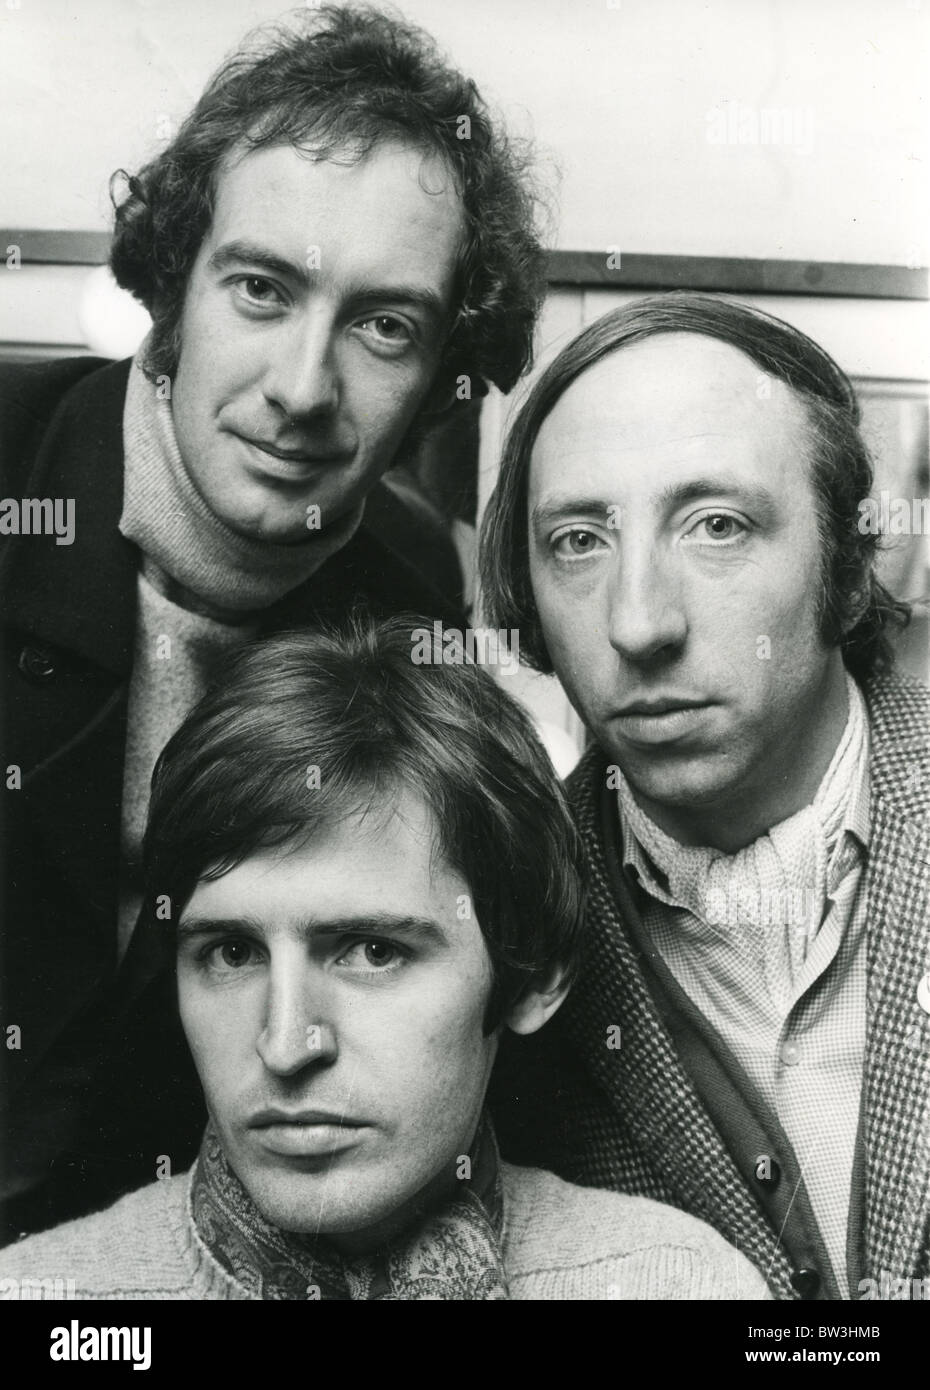 Kraan Polair Laag THE SCAFFOLD UK pop group in November 1968 from top left: Roger McGough,  John Gorman and Mike McGear. Photo Tony Gale Stock Photo - Alamy